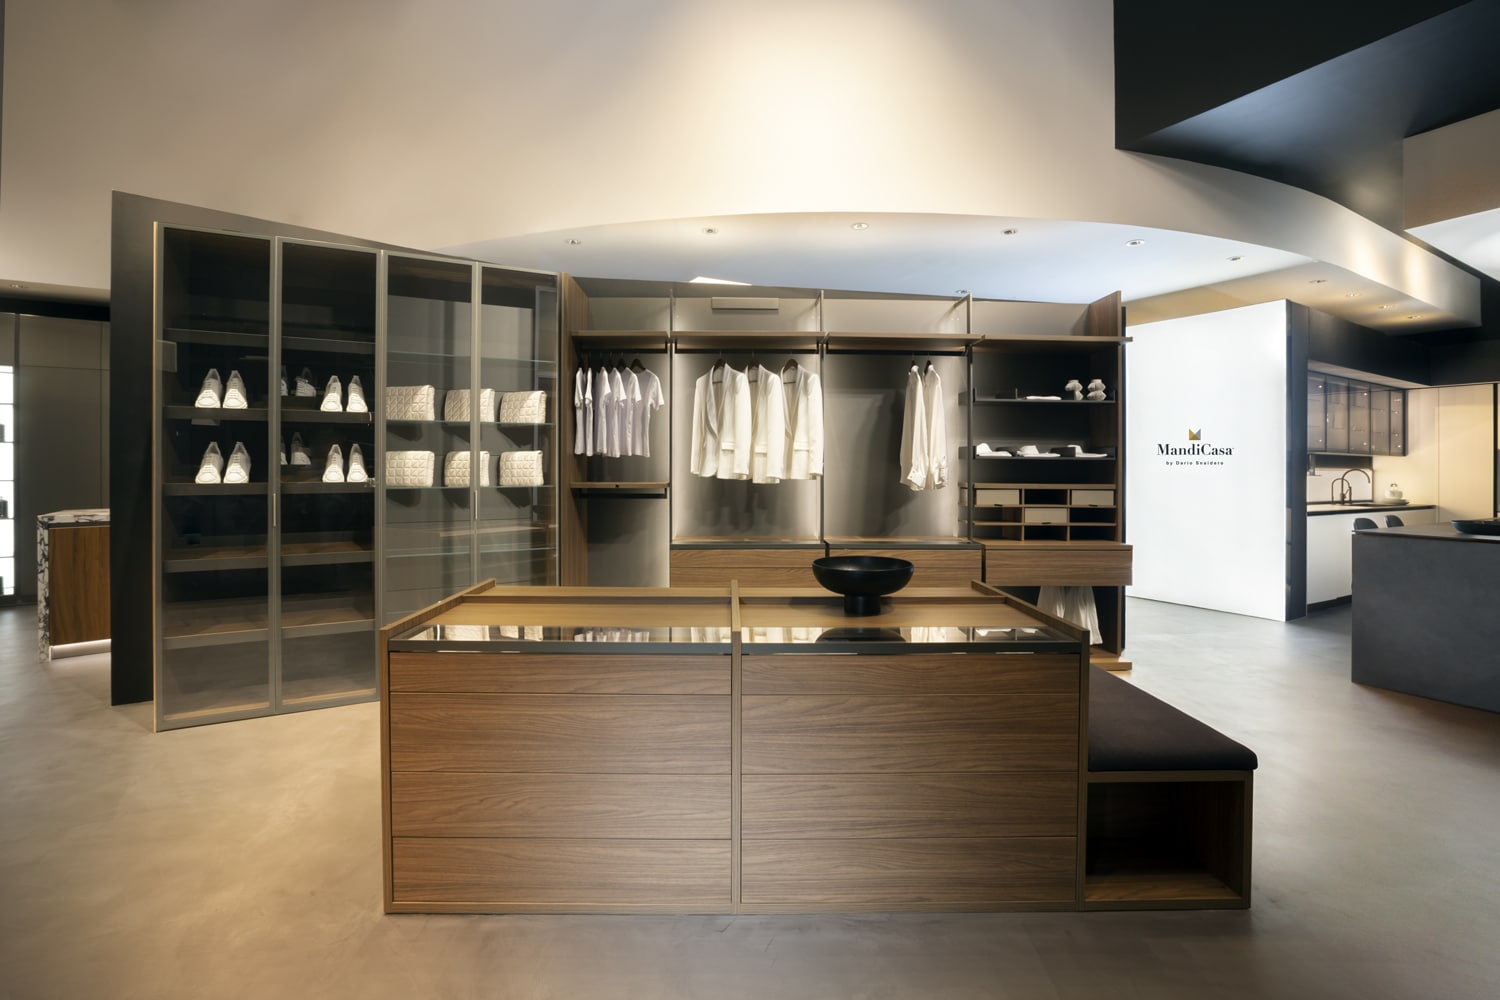 The walk-in closet system combines customizable open modules and Core units with framed glass doors. Dimmable, remote-controlled and sensor lights.